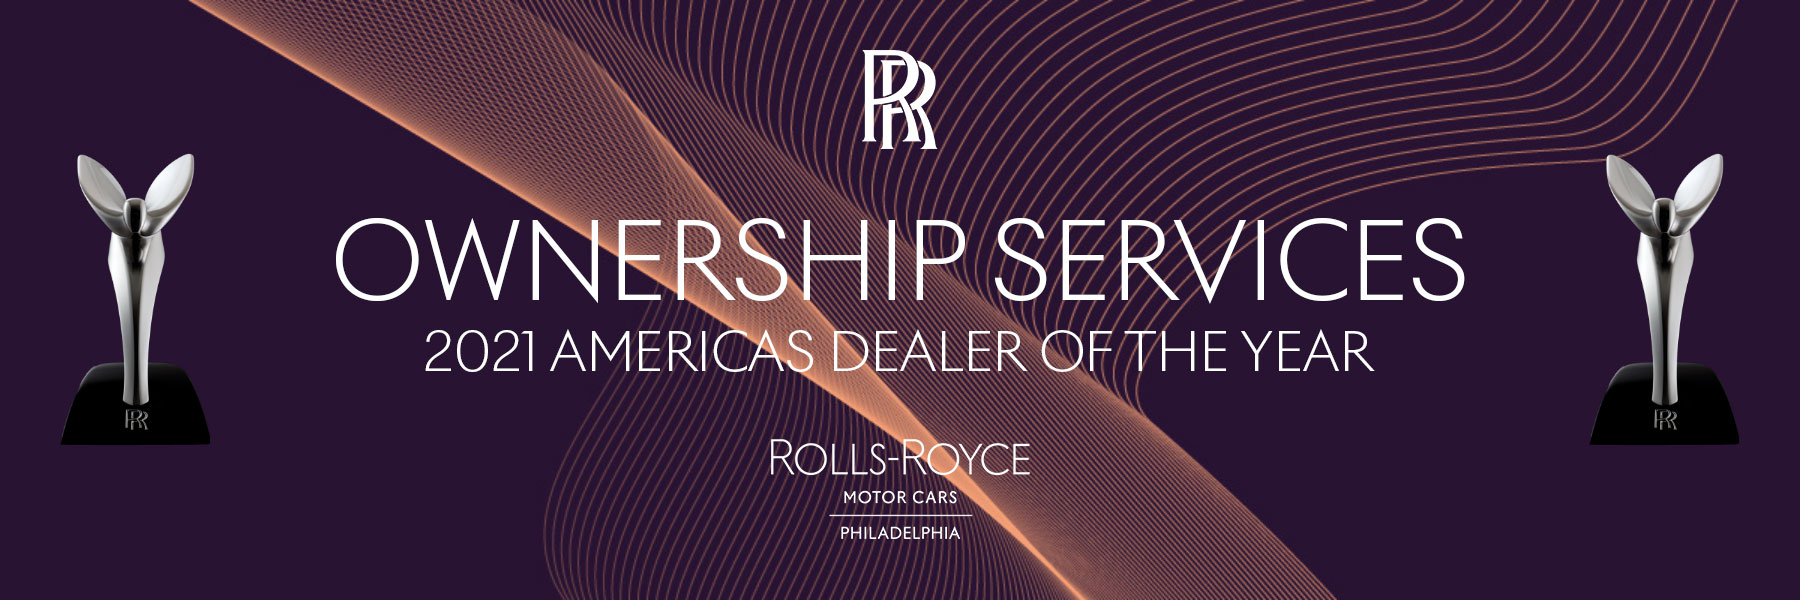 Ownership Services 2021 Americas Dealer Of The Year